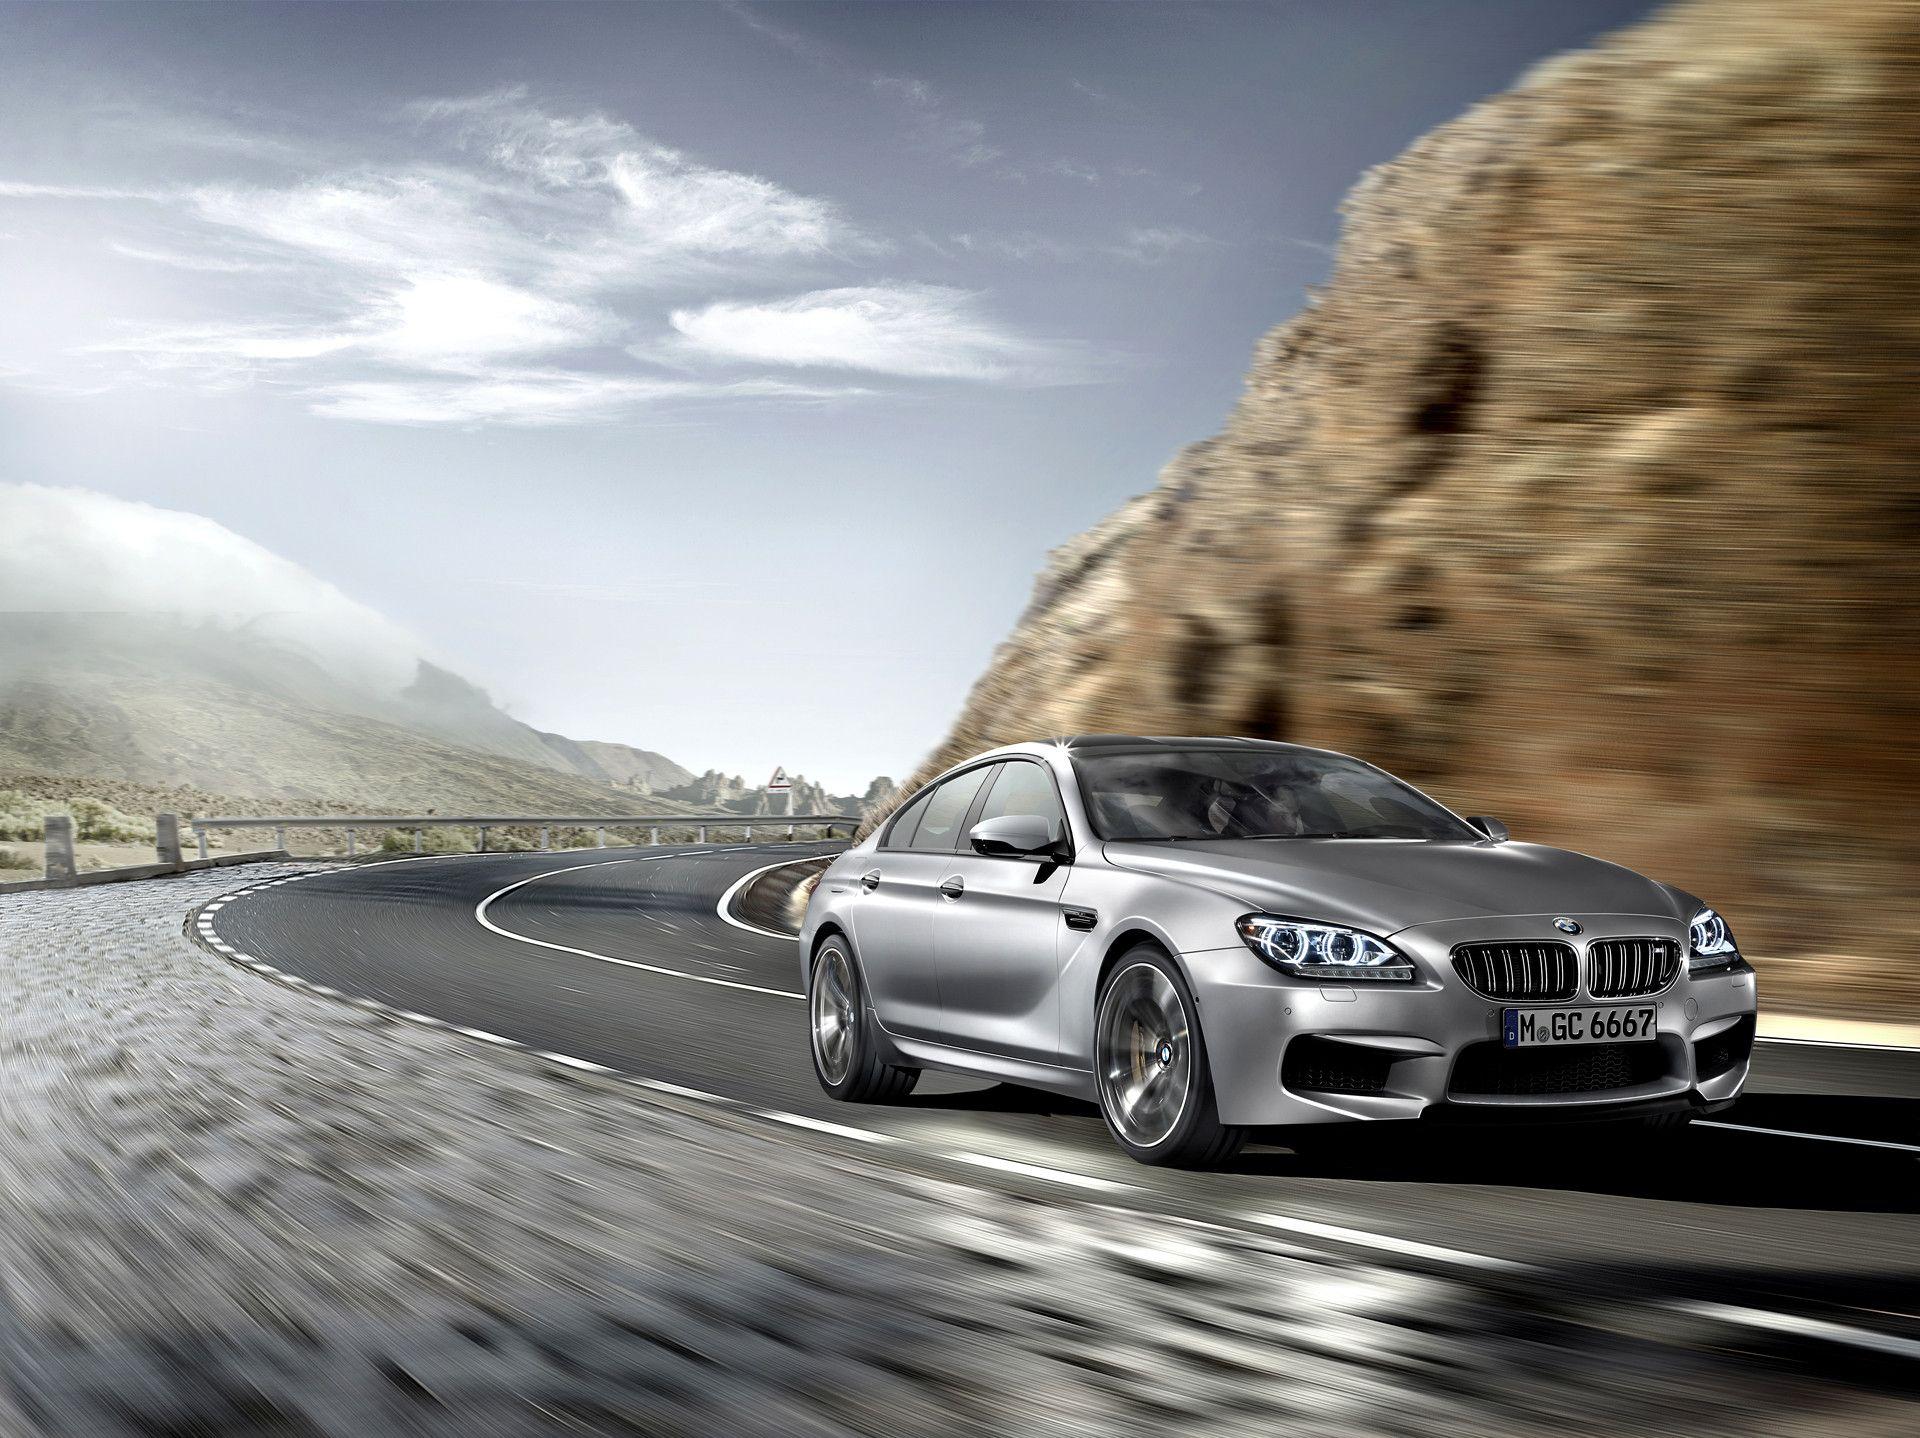 BMW M6 Gran Coupé specification and new high res image